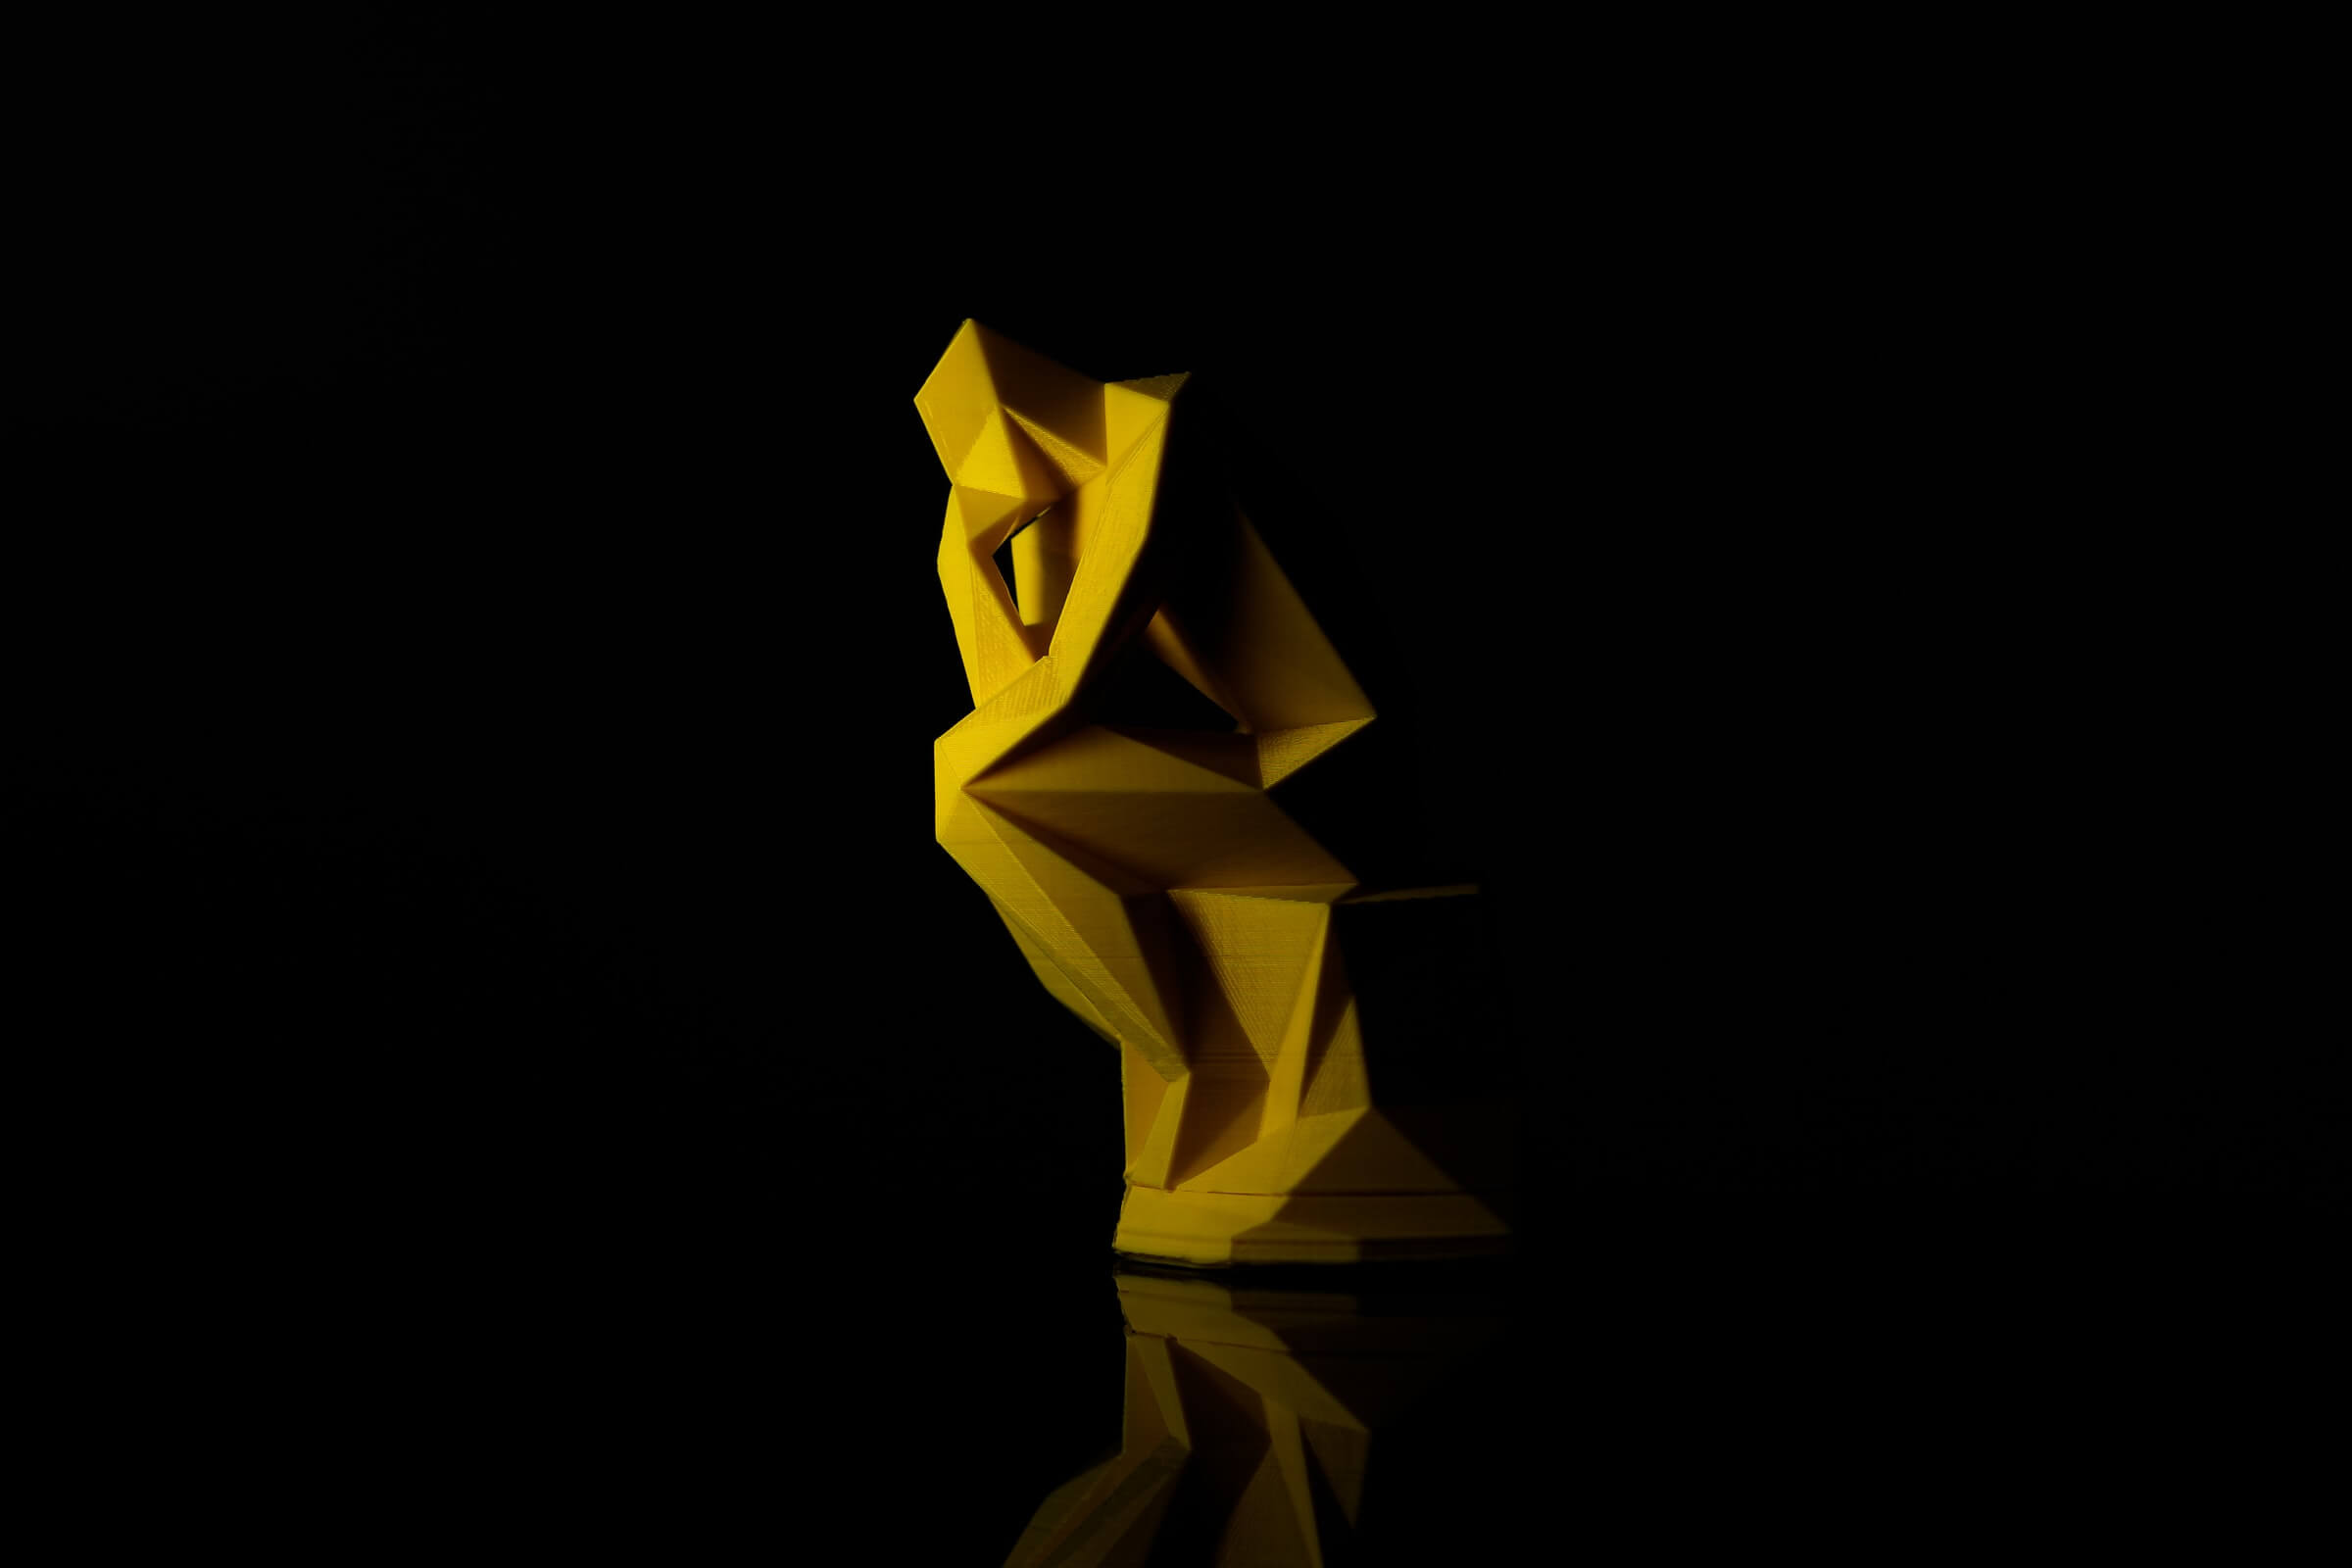 Yellow Sculptural Model of Man with Chin on Hand Against Black Background